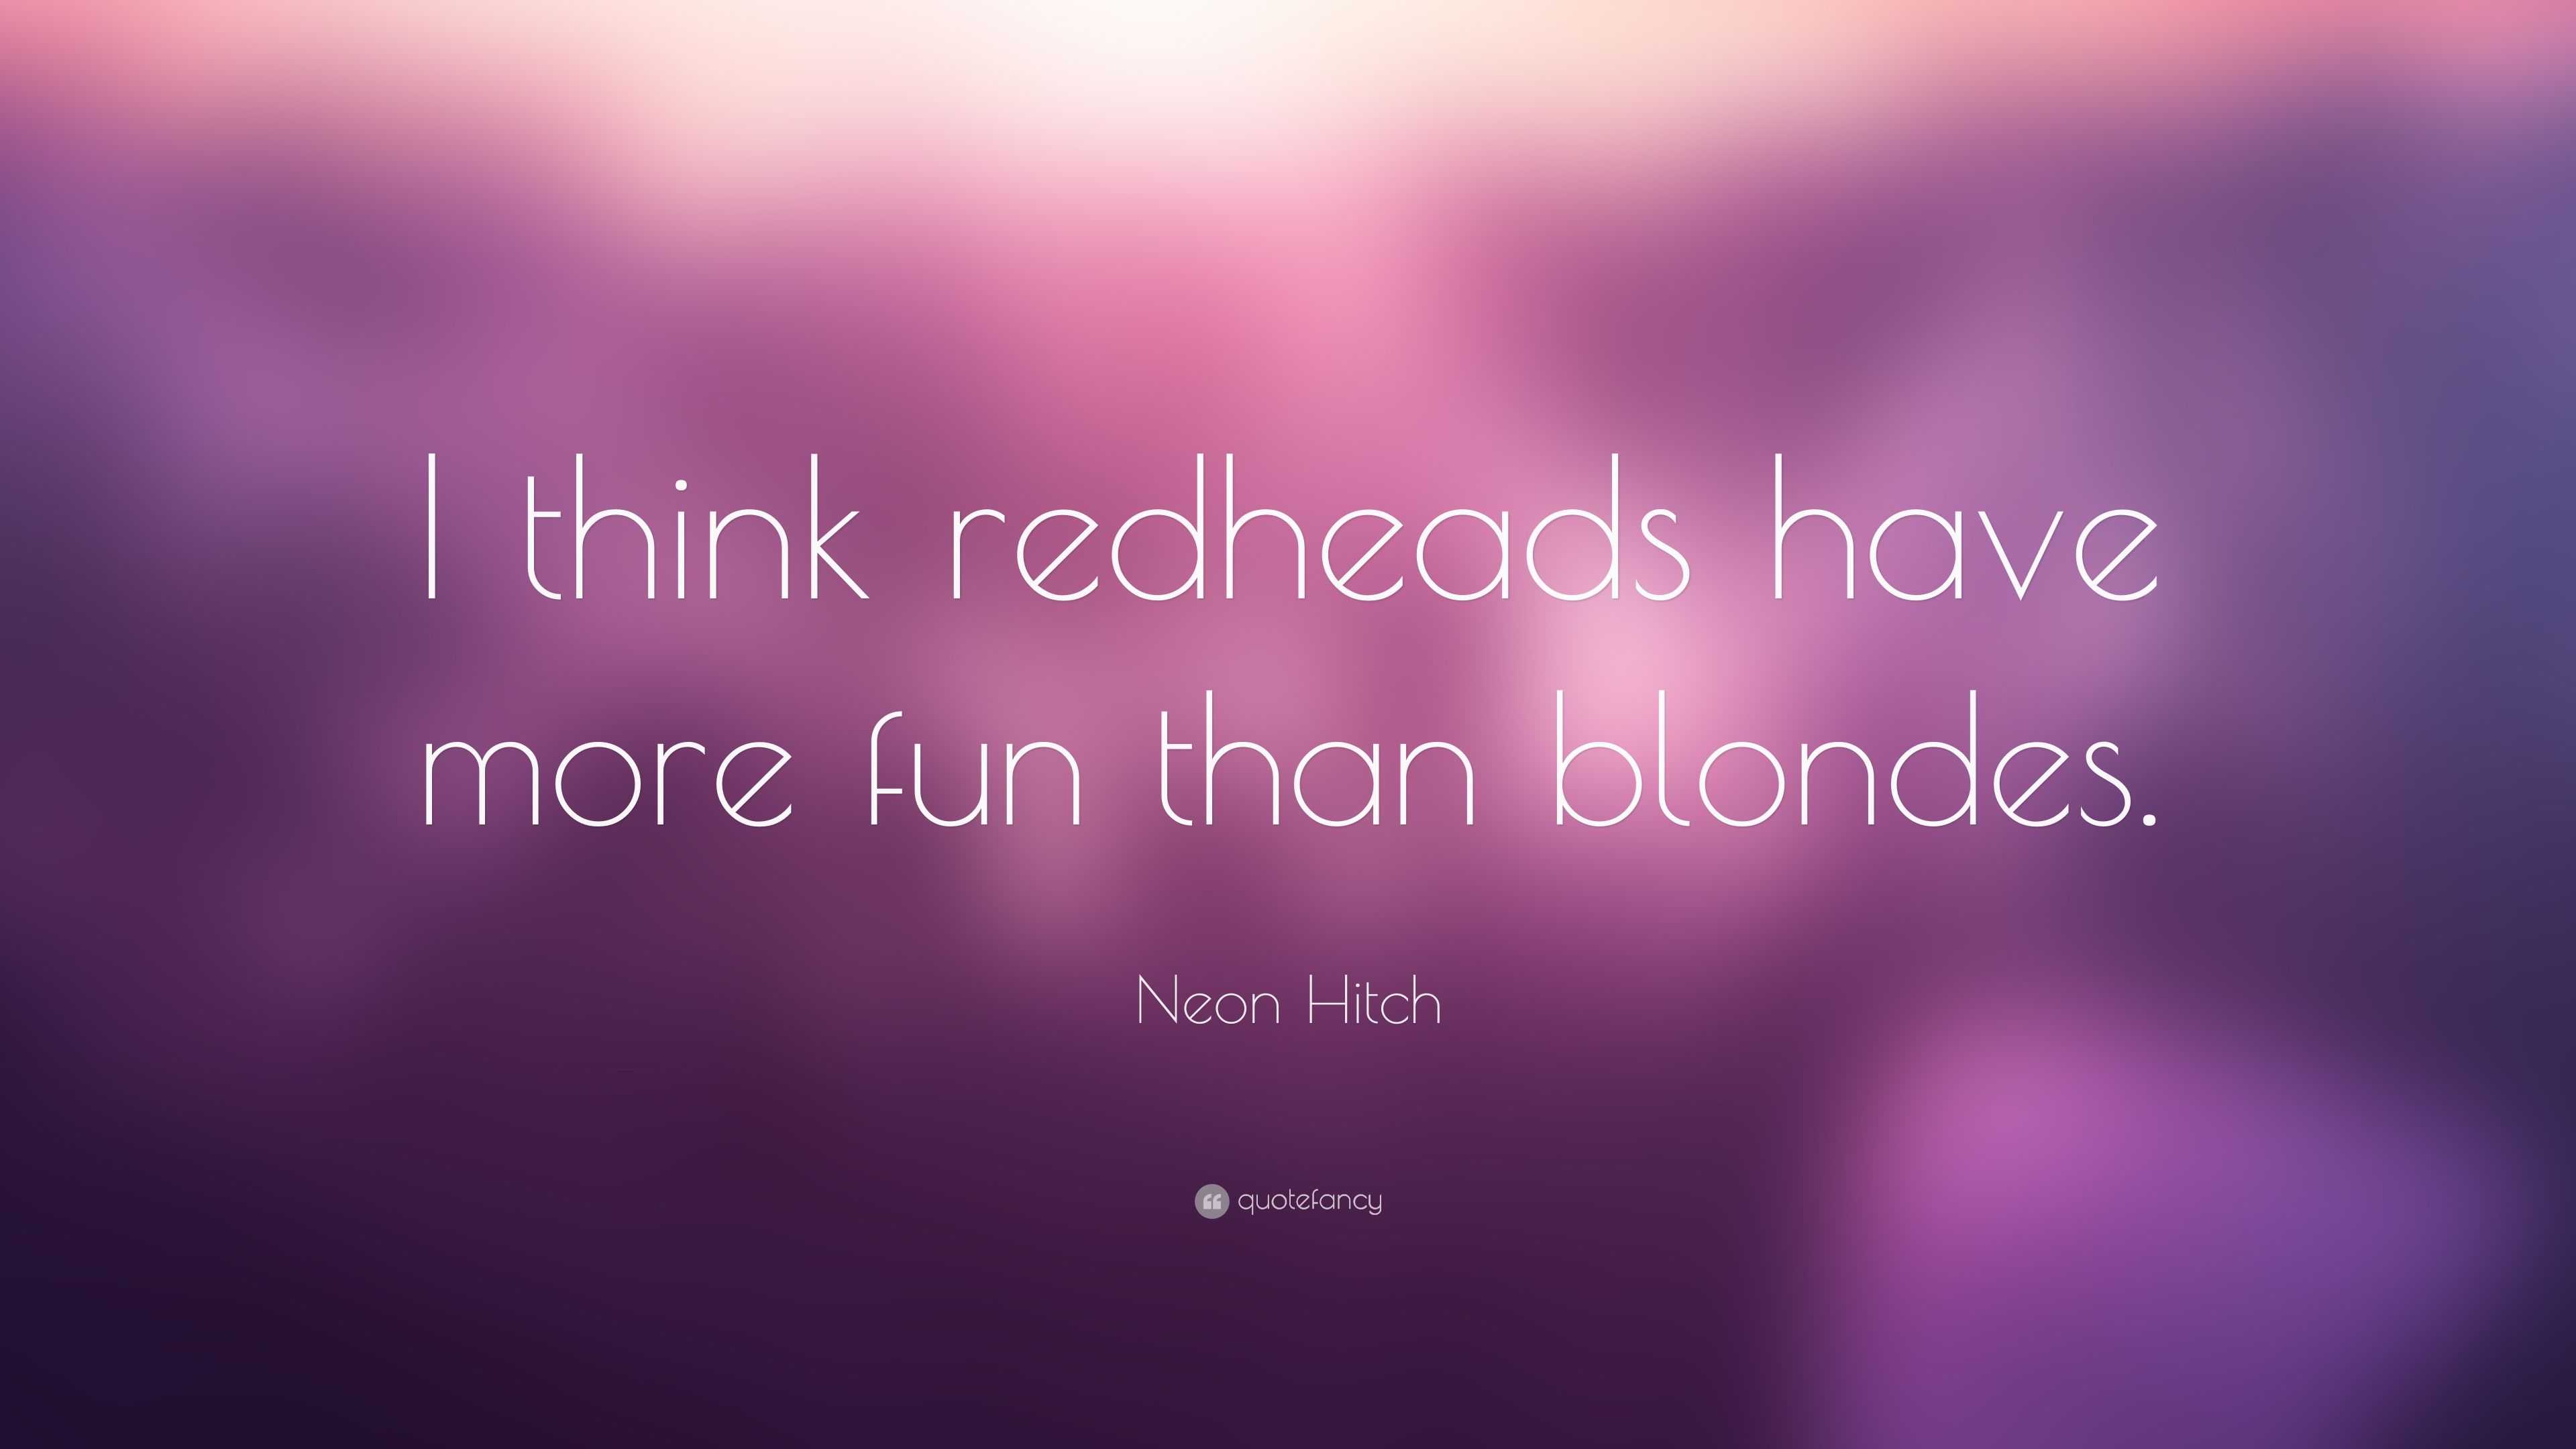 Red heads are more fun